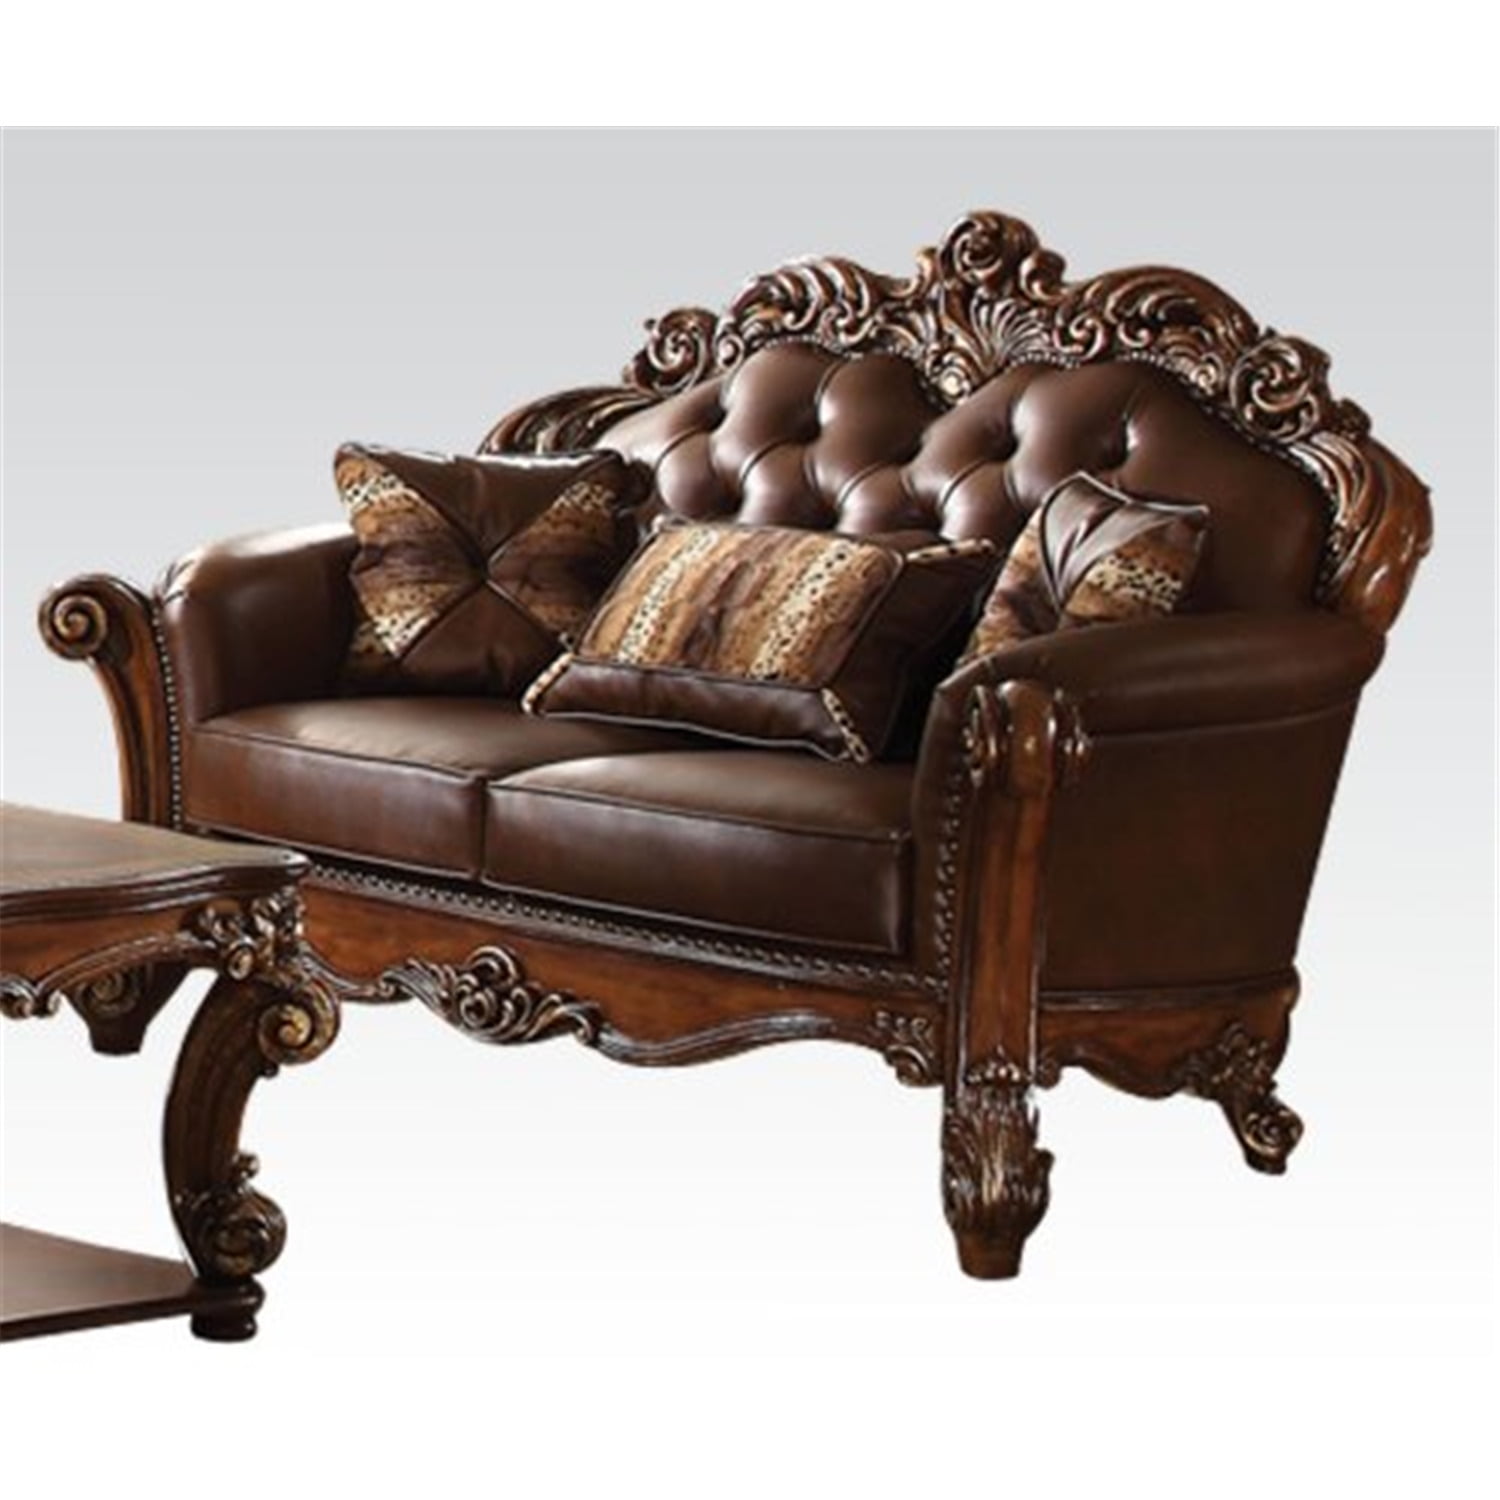 ACME Vendome Loveseat w/2 Pillows, Cherry PU-ColorCherry PU and Cherry,Quantity1,StyleVintage/Traditional/Victorian 